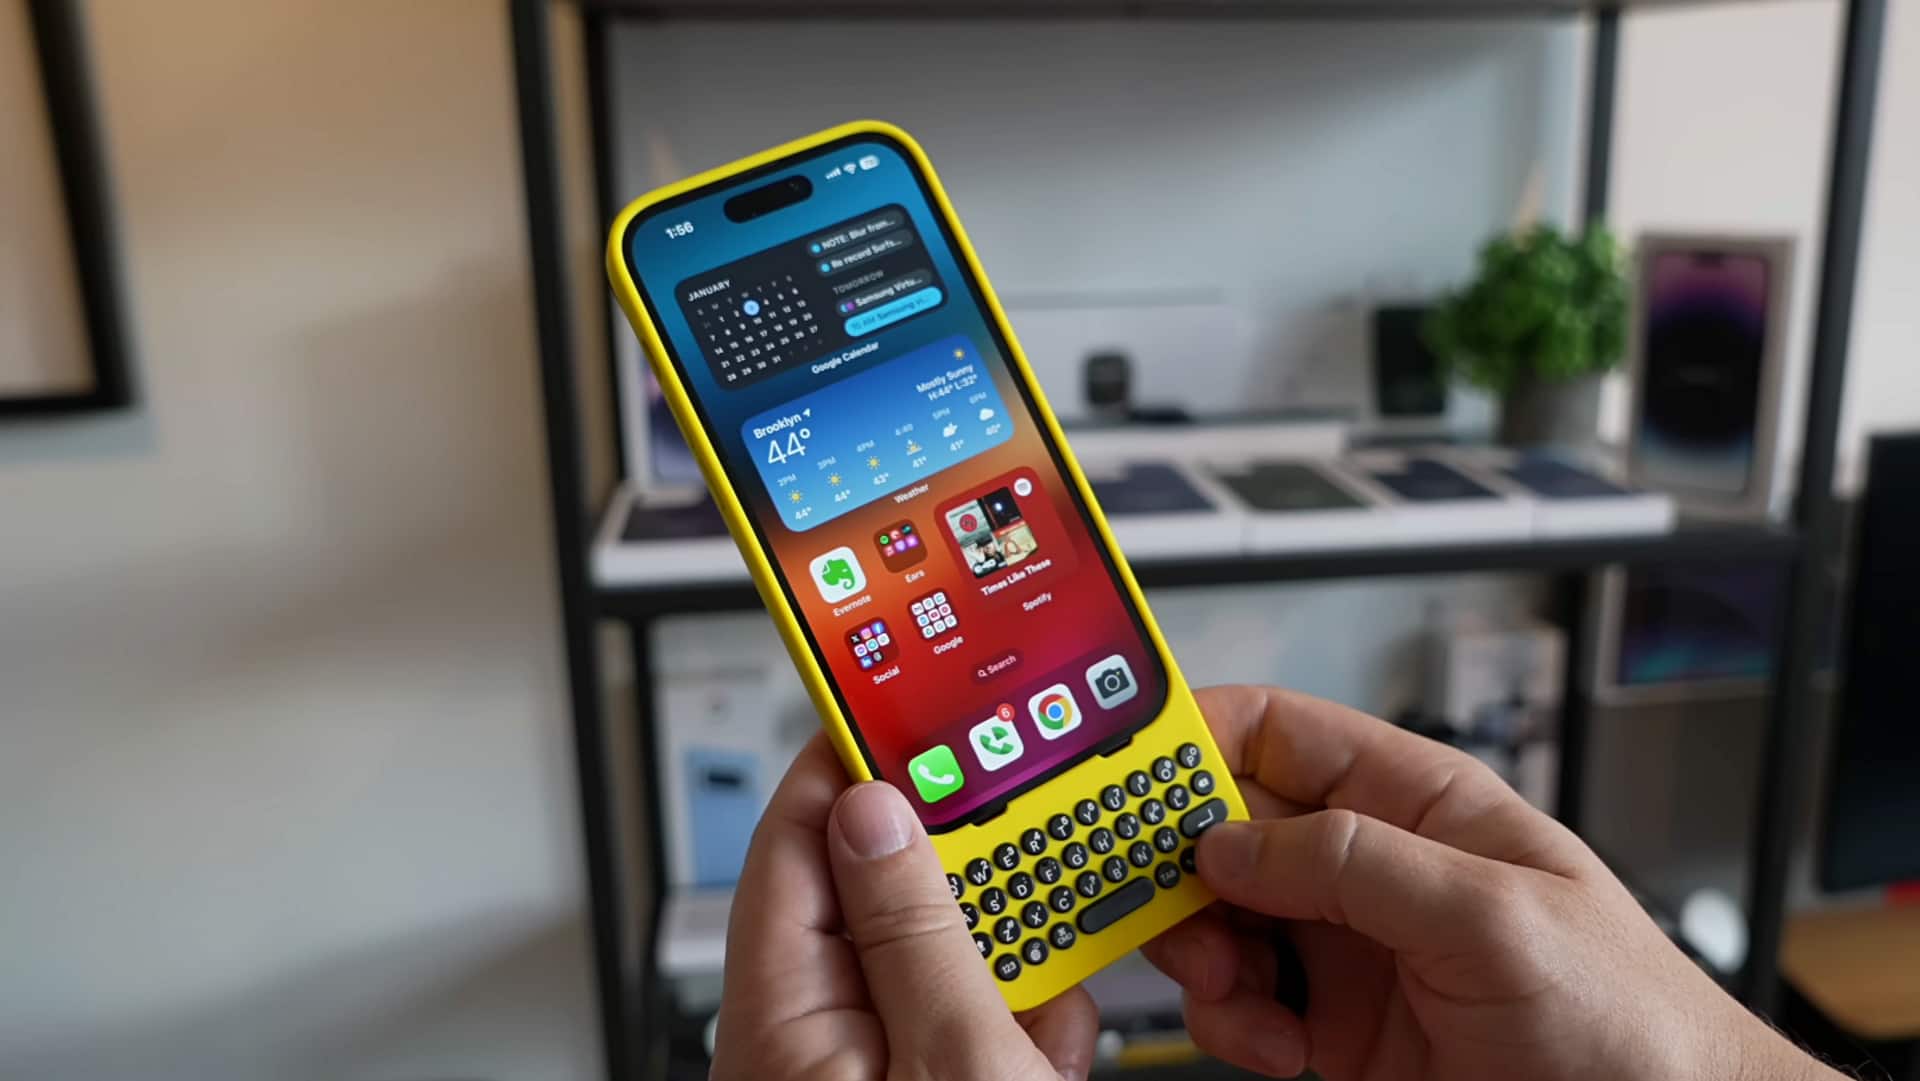 This BlackBerry-style keyboard for iPhones costs around Rs. 12,000 